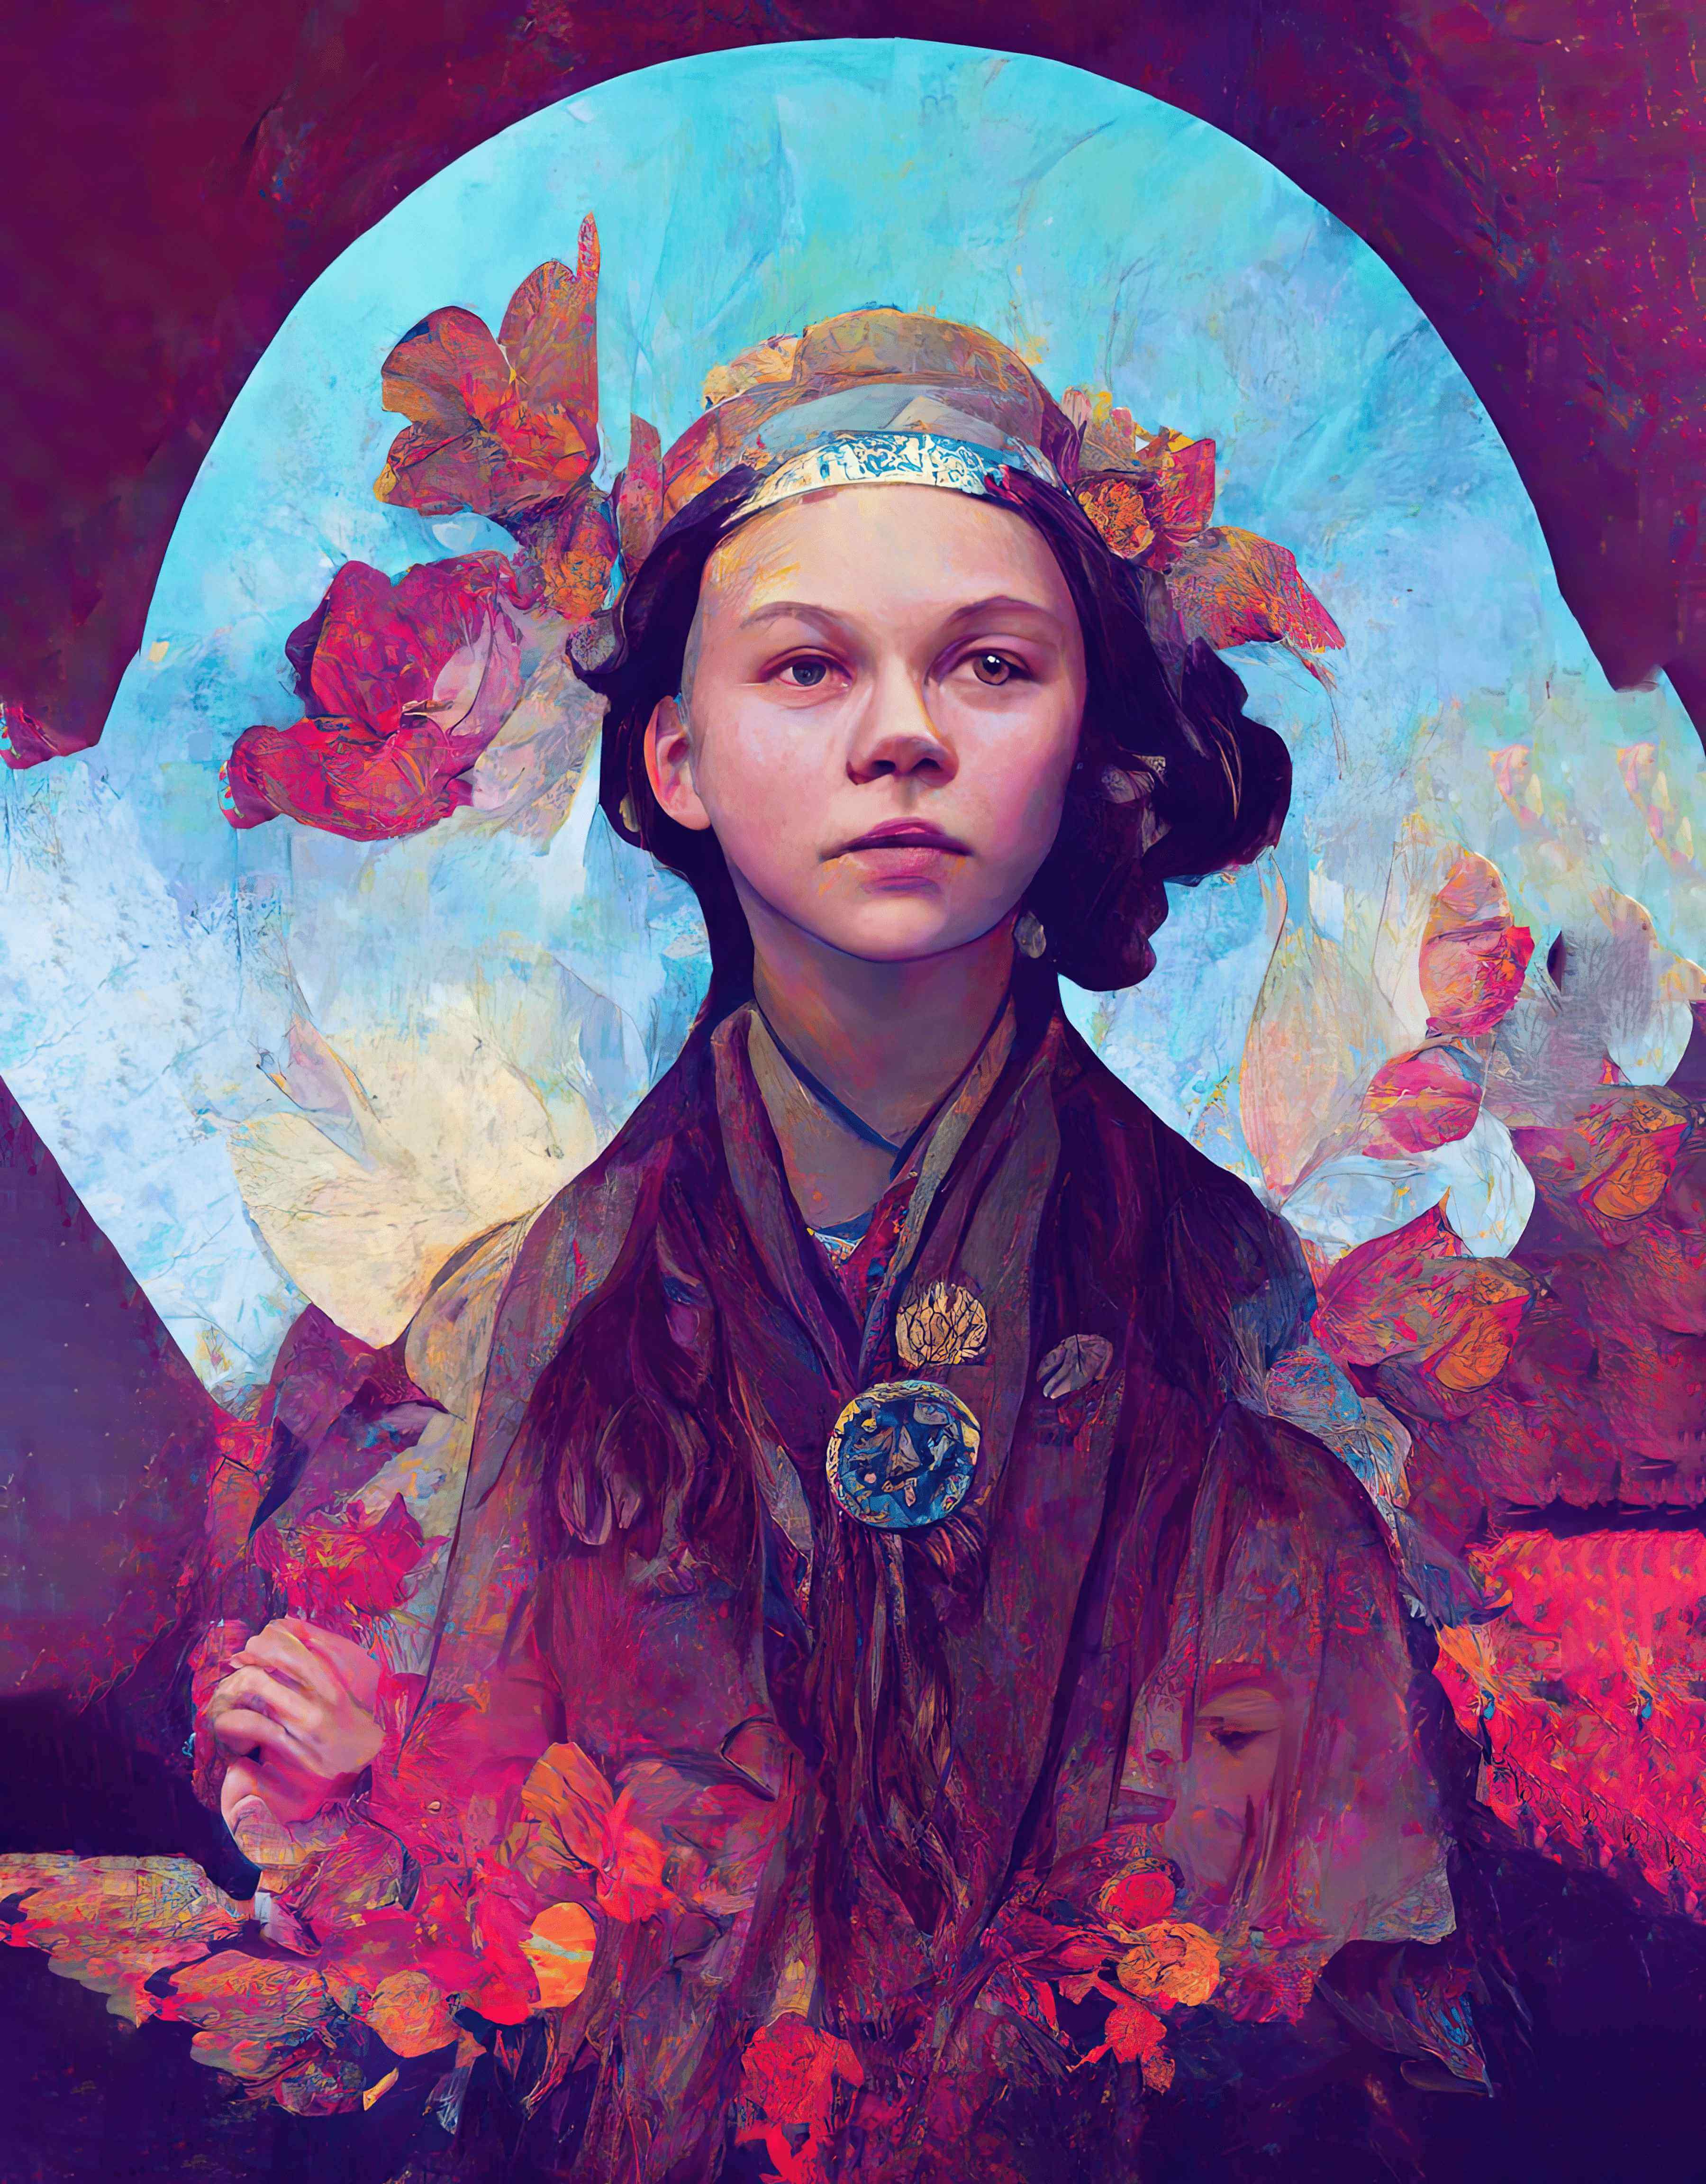 A painterly illustration of a young girl's face cropped to show the chest and heads. Abstract colors swirl around. A vibrant blue circle vignettes her head; the background has magenta brush strokes that look like flower petals. The girl's hair is tied to one side. She is wearing a headband; a medallion; and is draped in an earthy poncho.